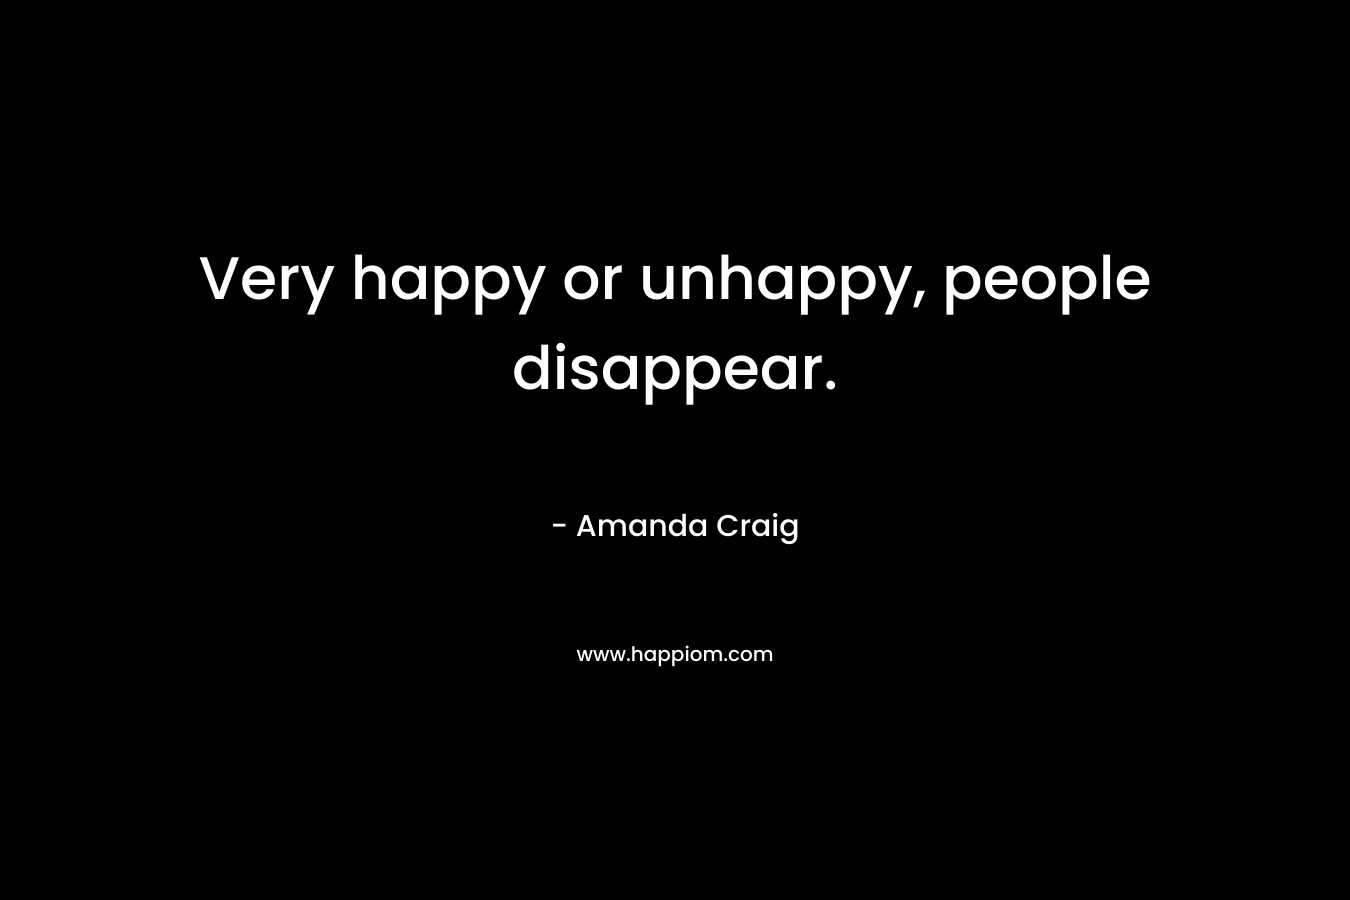 Very happy or unhappy, people disappear.